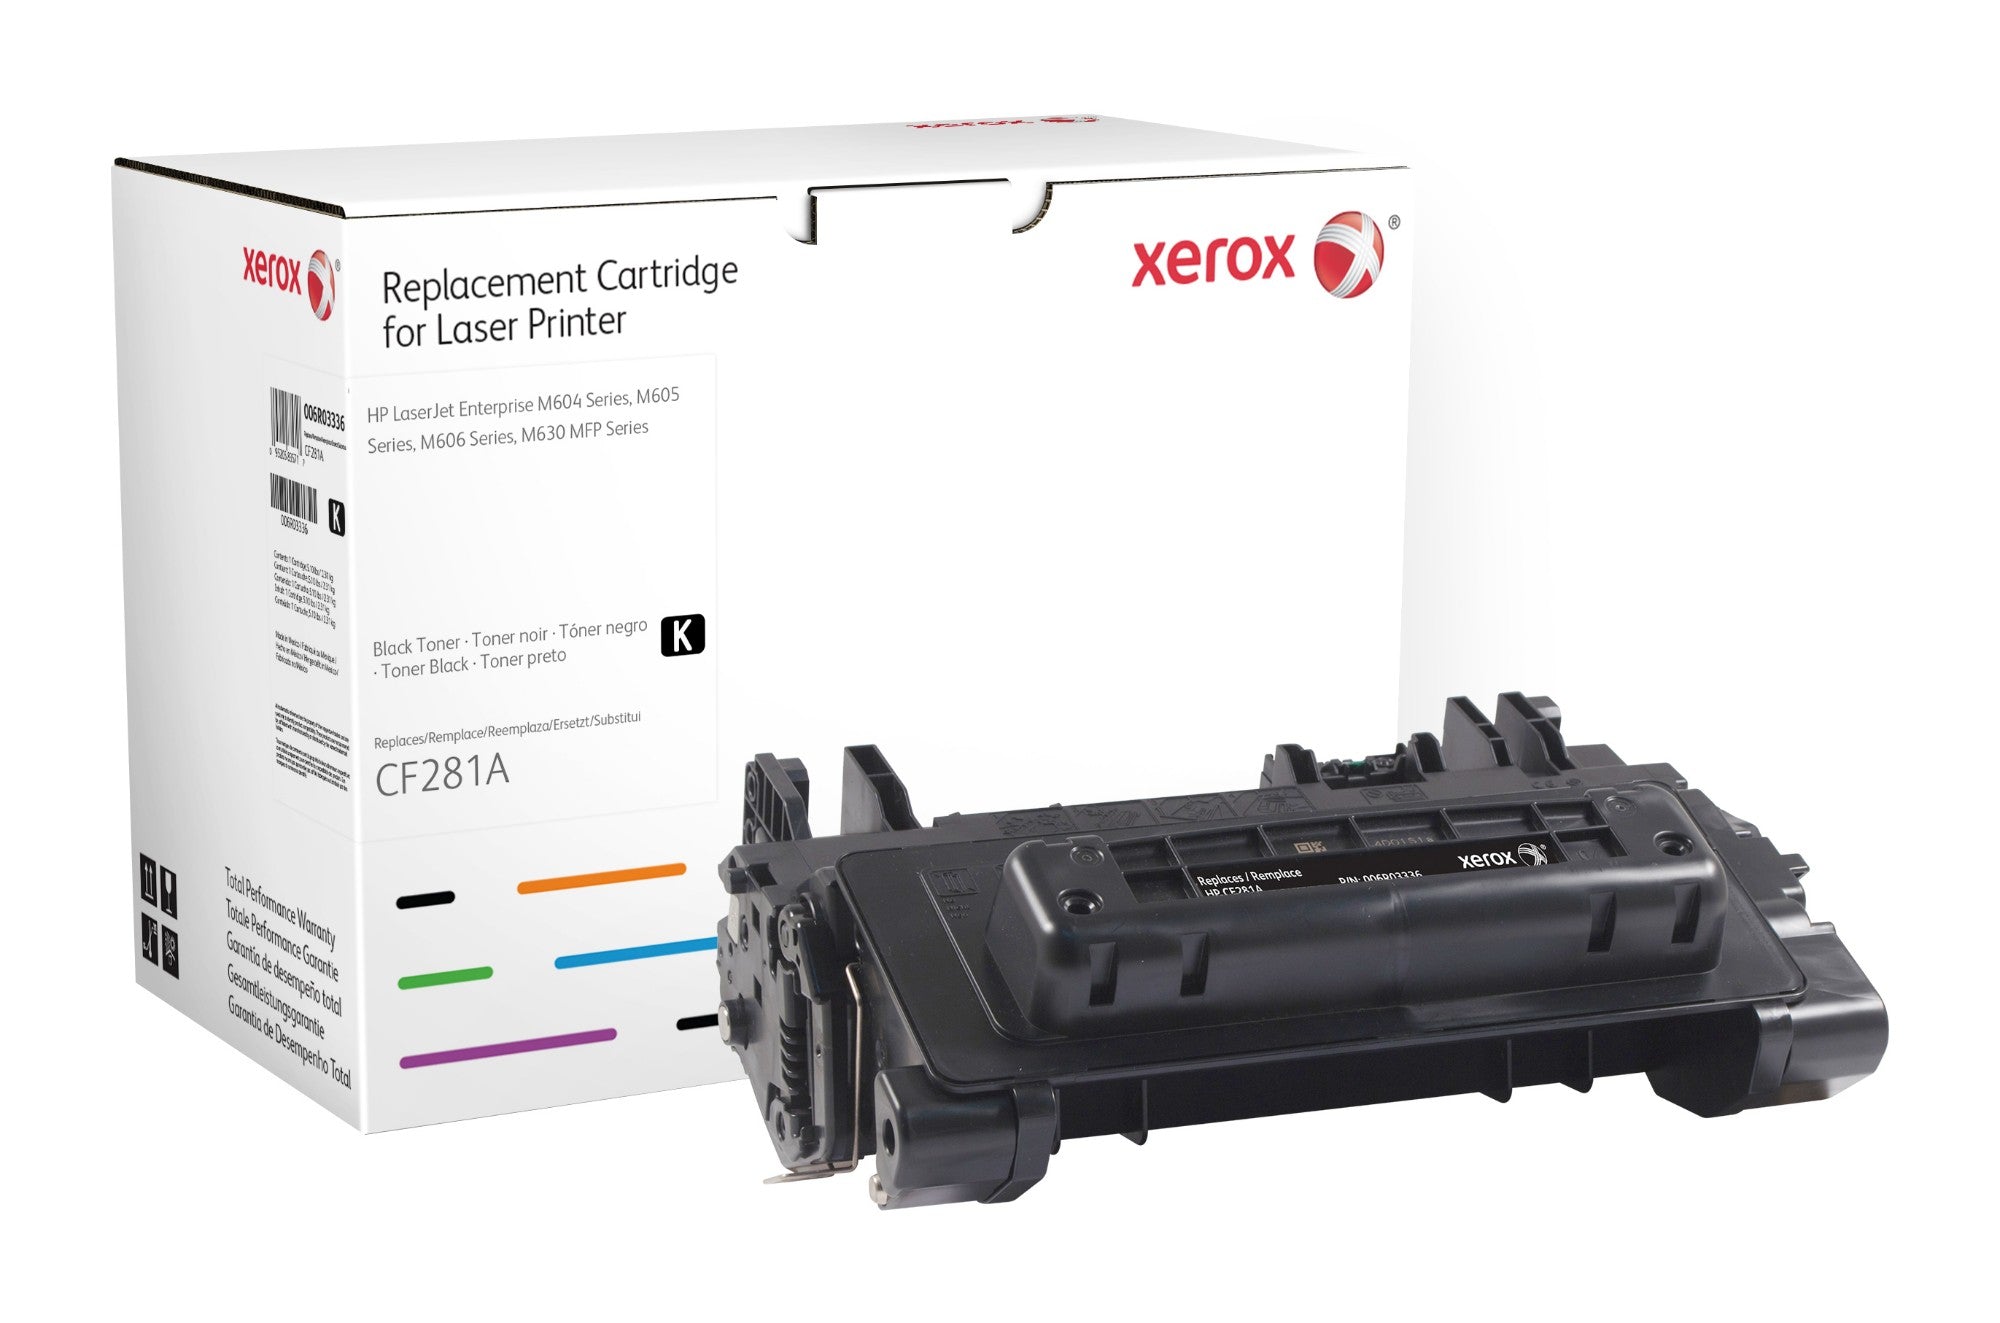 Xerox 006R03336 Toner cartridge black, 13.3K pages (replaces HP 81A/CF281A) for HP LaserJet M 604/606/630